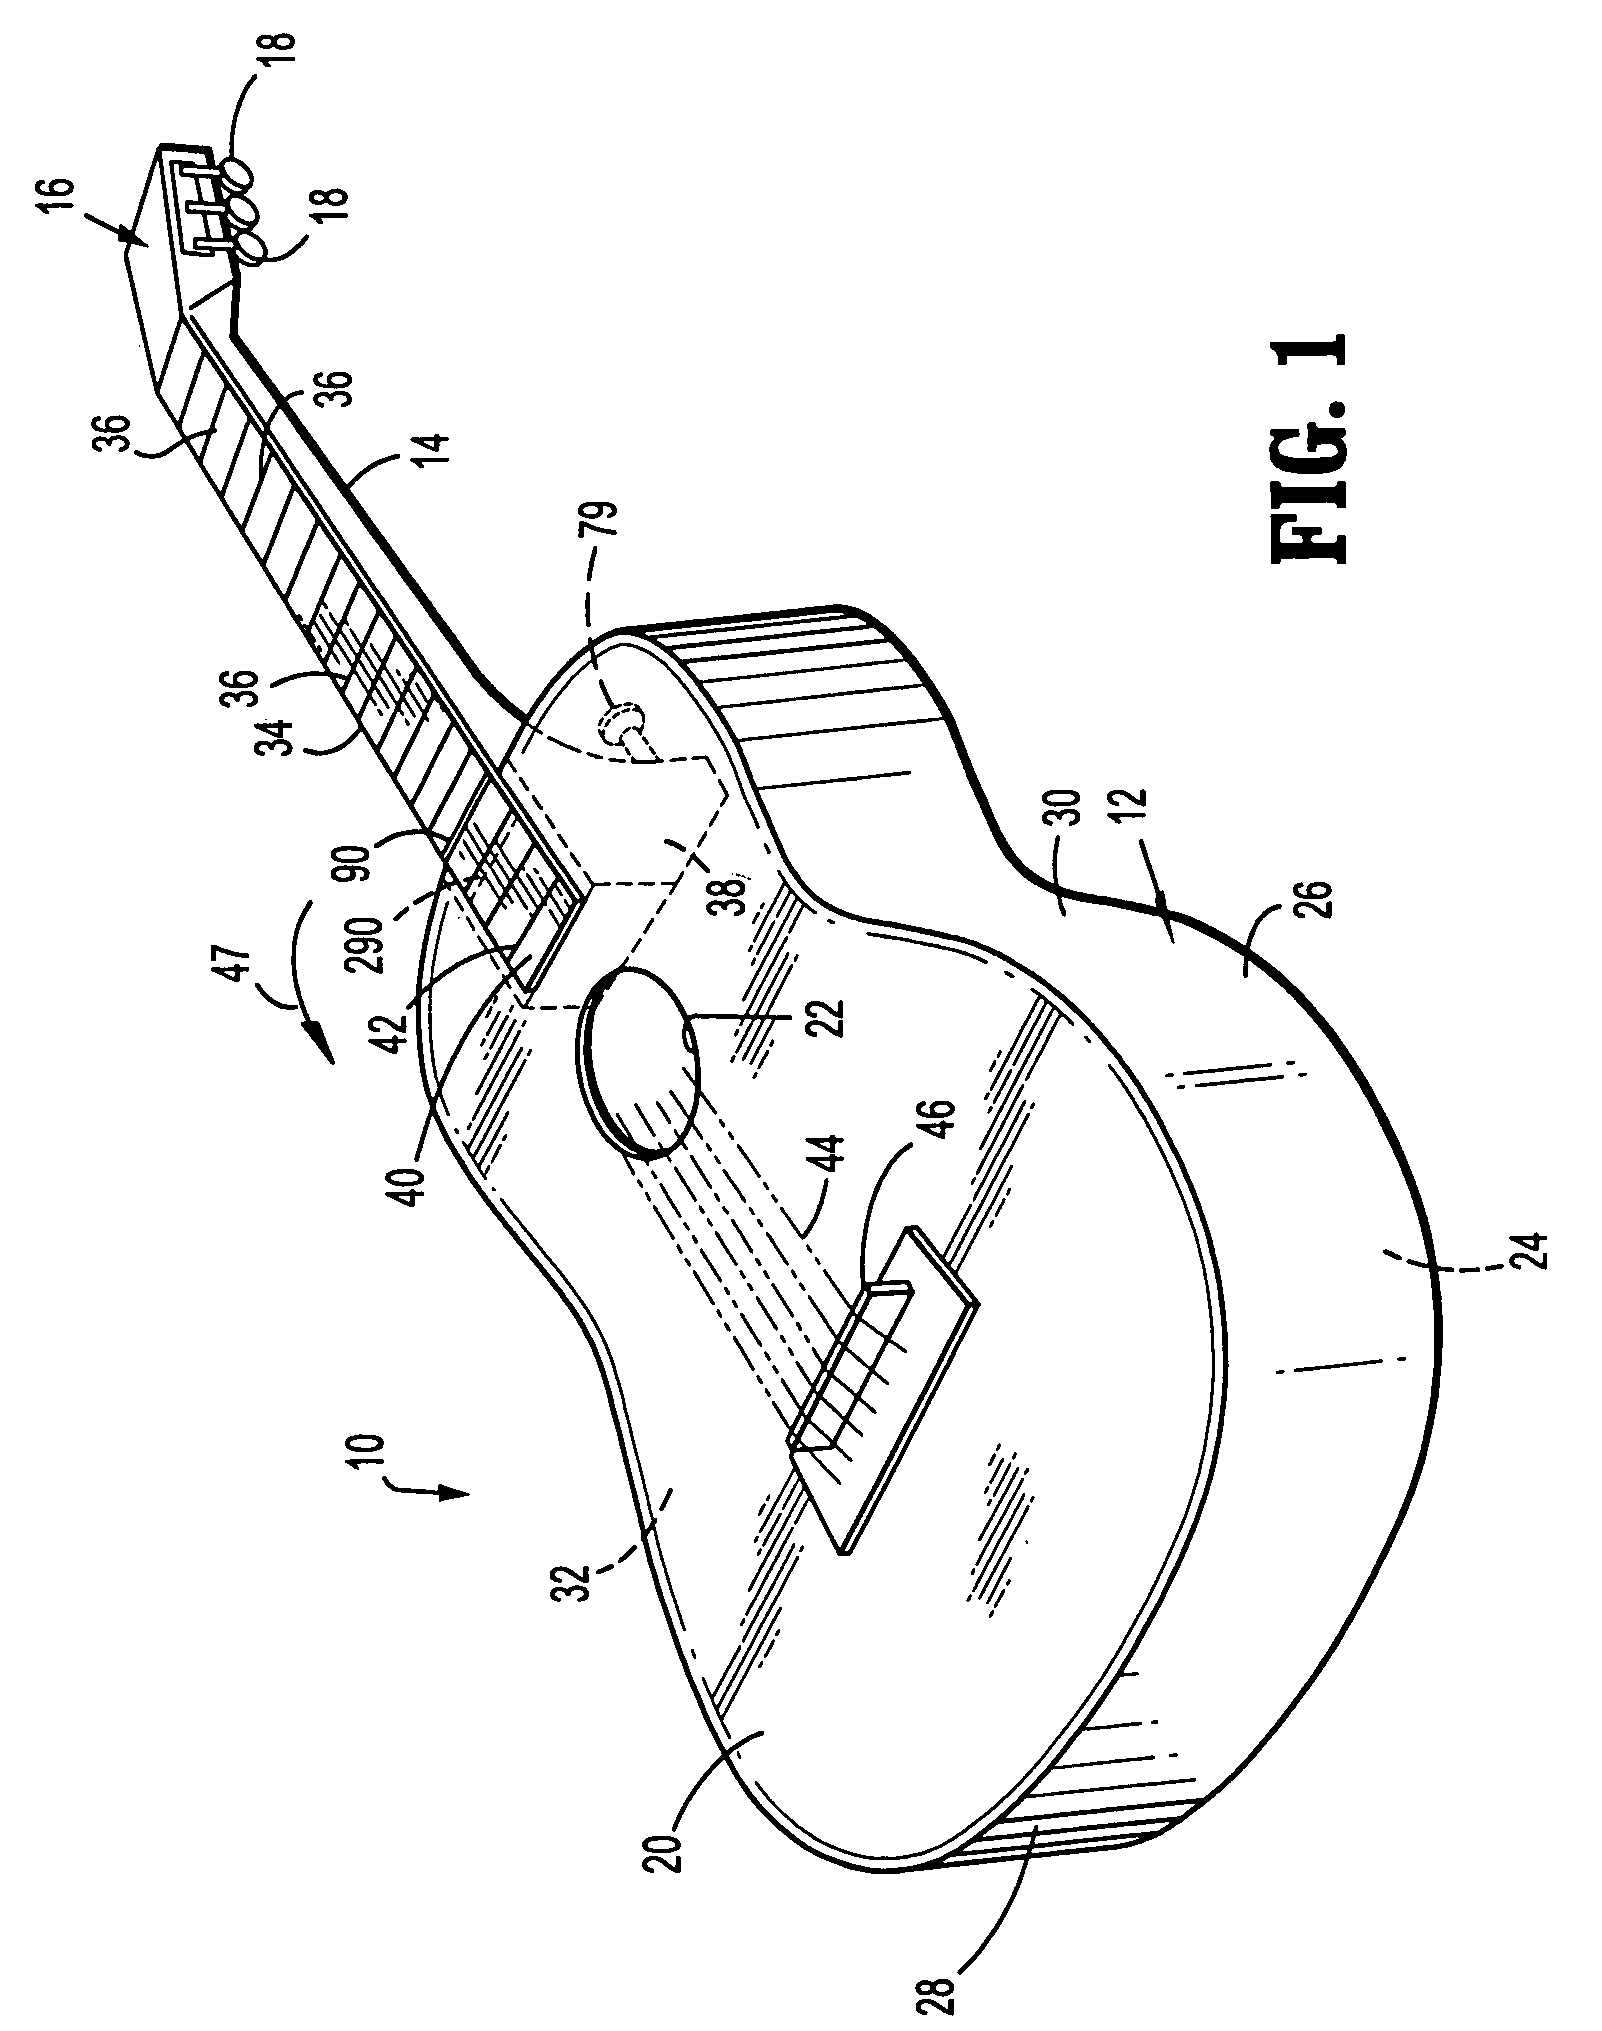 Travel string instrument and method of making same